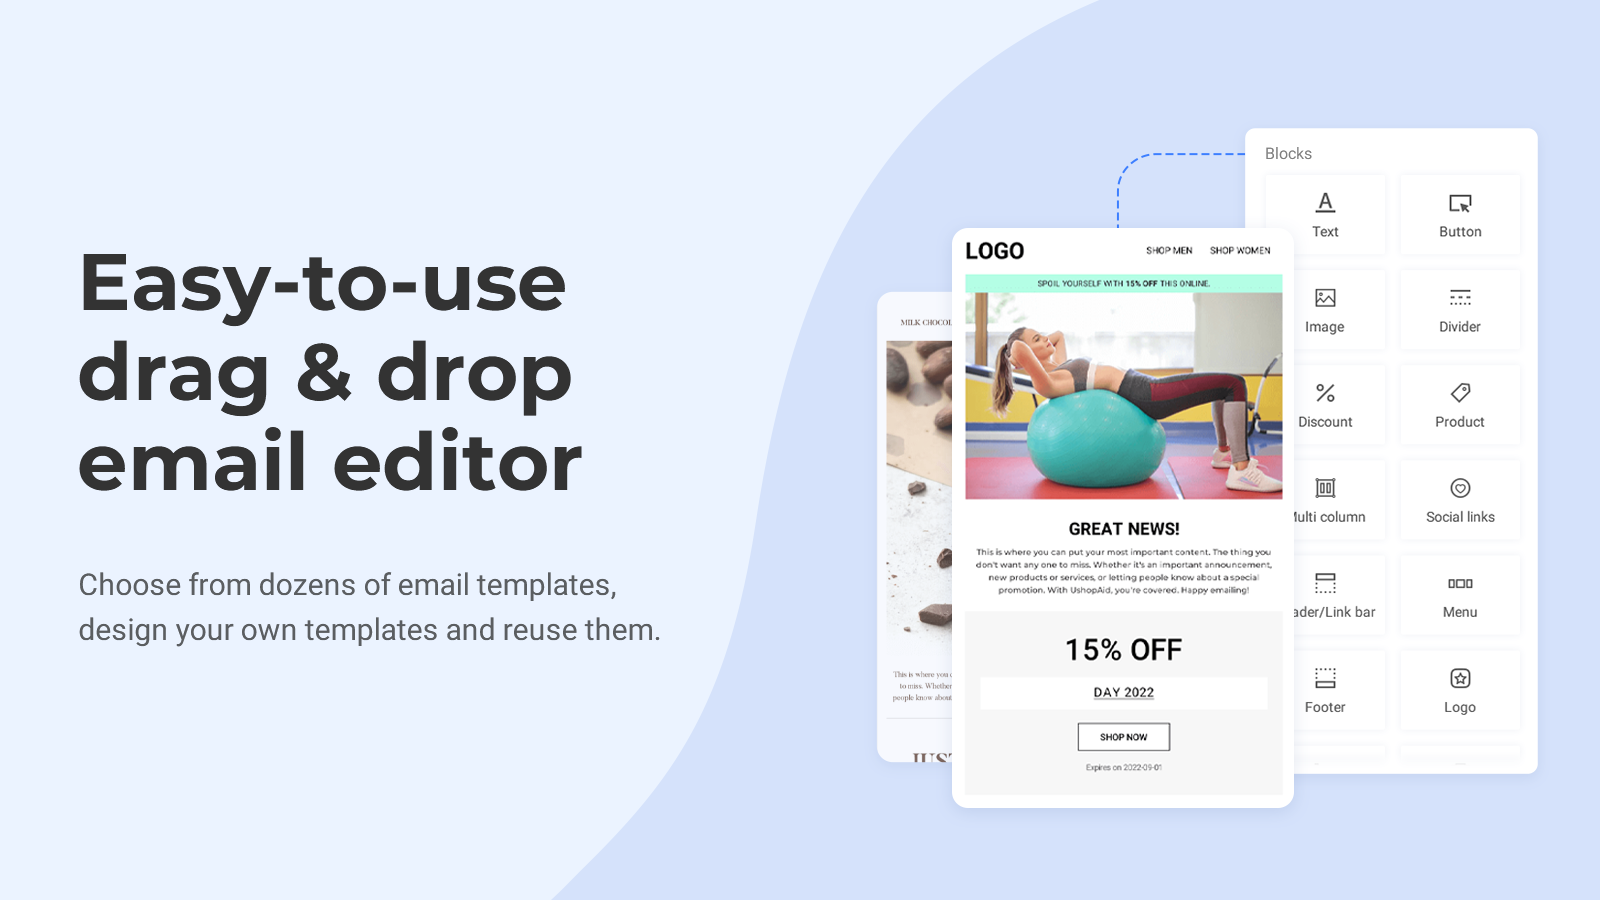 Drag & drop email editor.